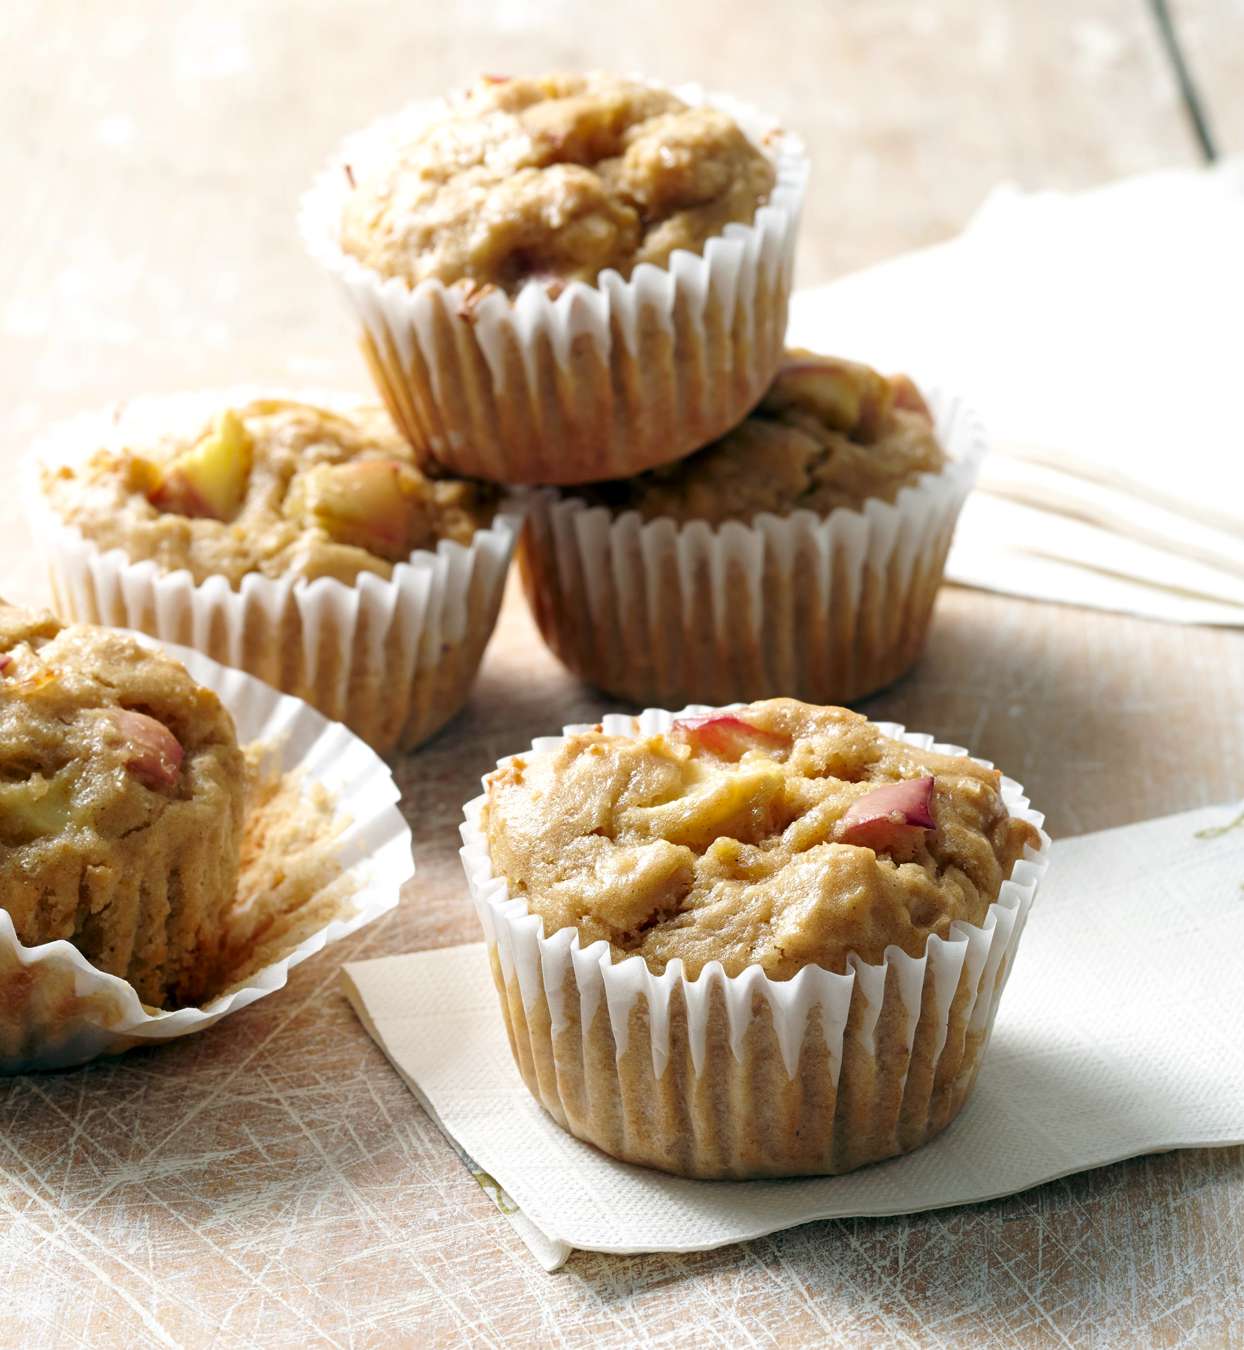 Spiced Apple and Chickpea Muffins